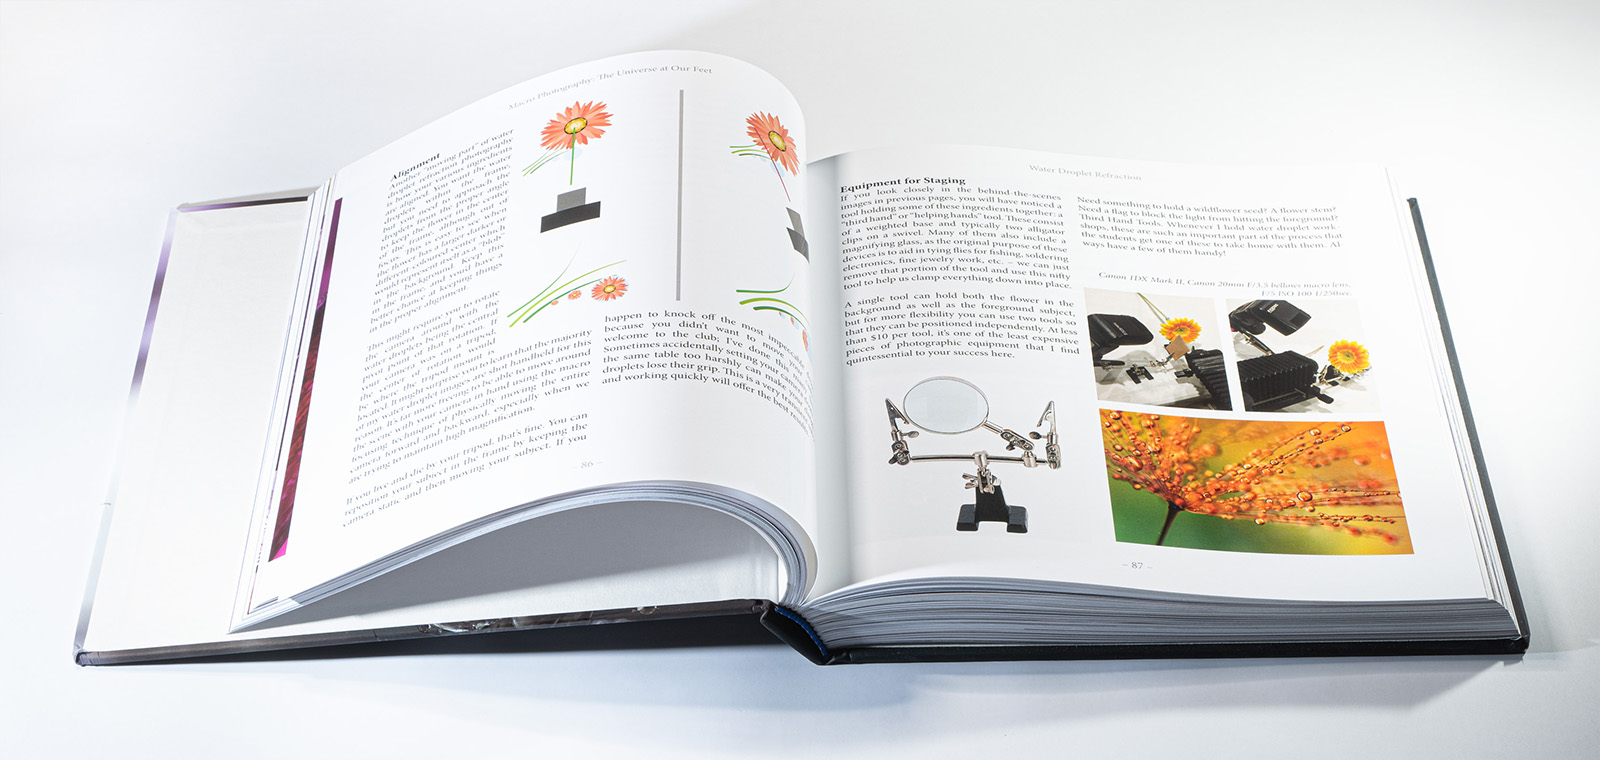 Review of Macro Photography Book by Don Komarechka